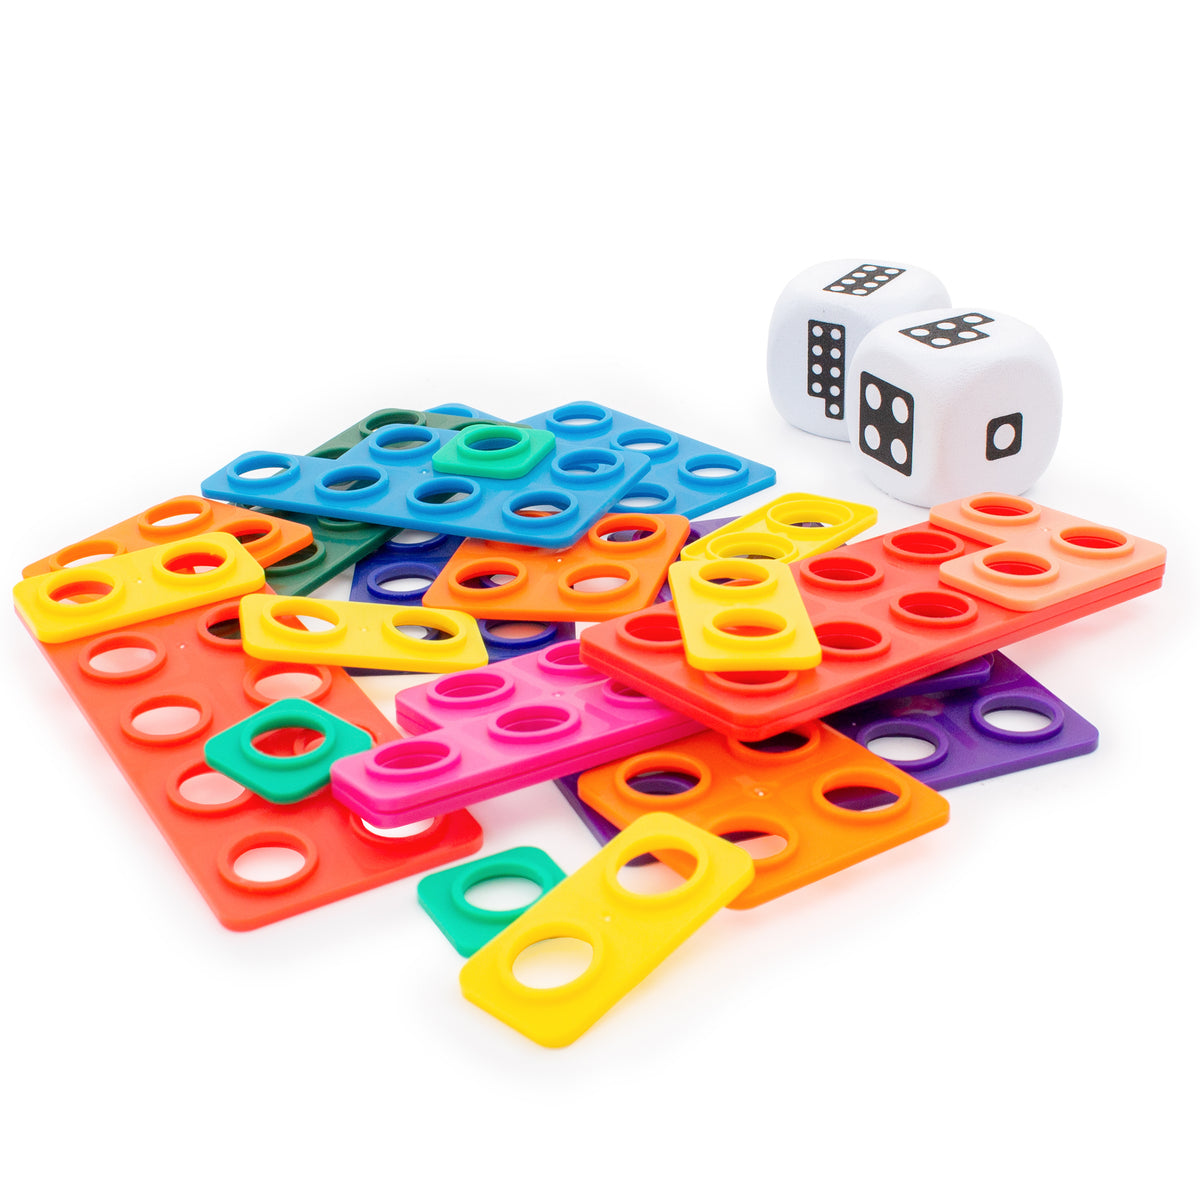 Junior Learning JL155 Ten Frame Towers all pieces